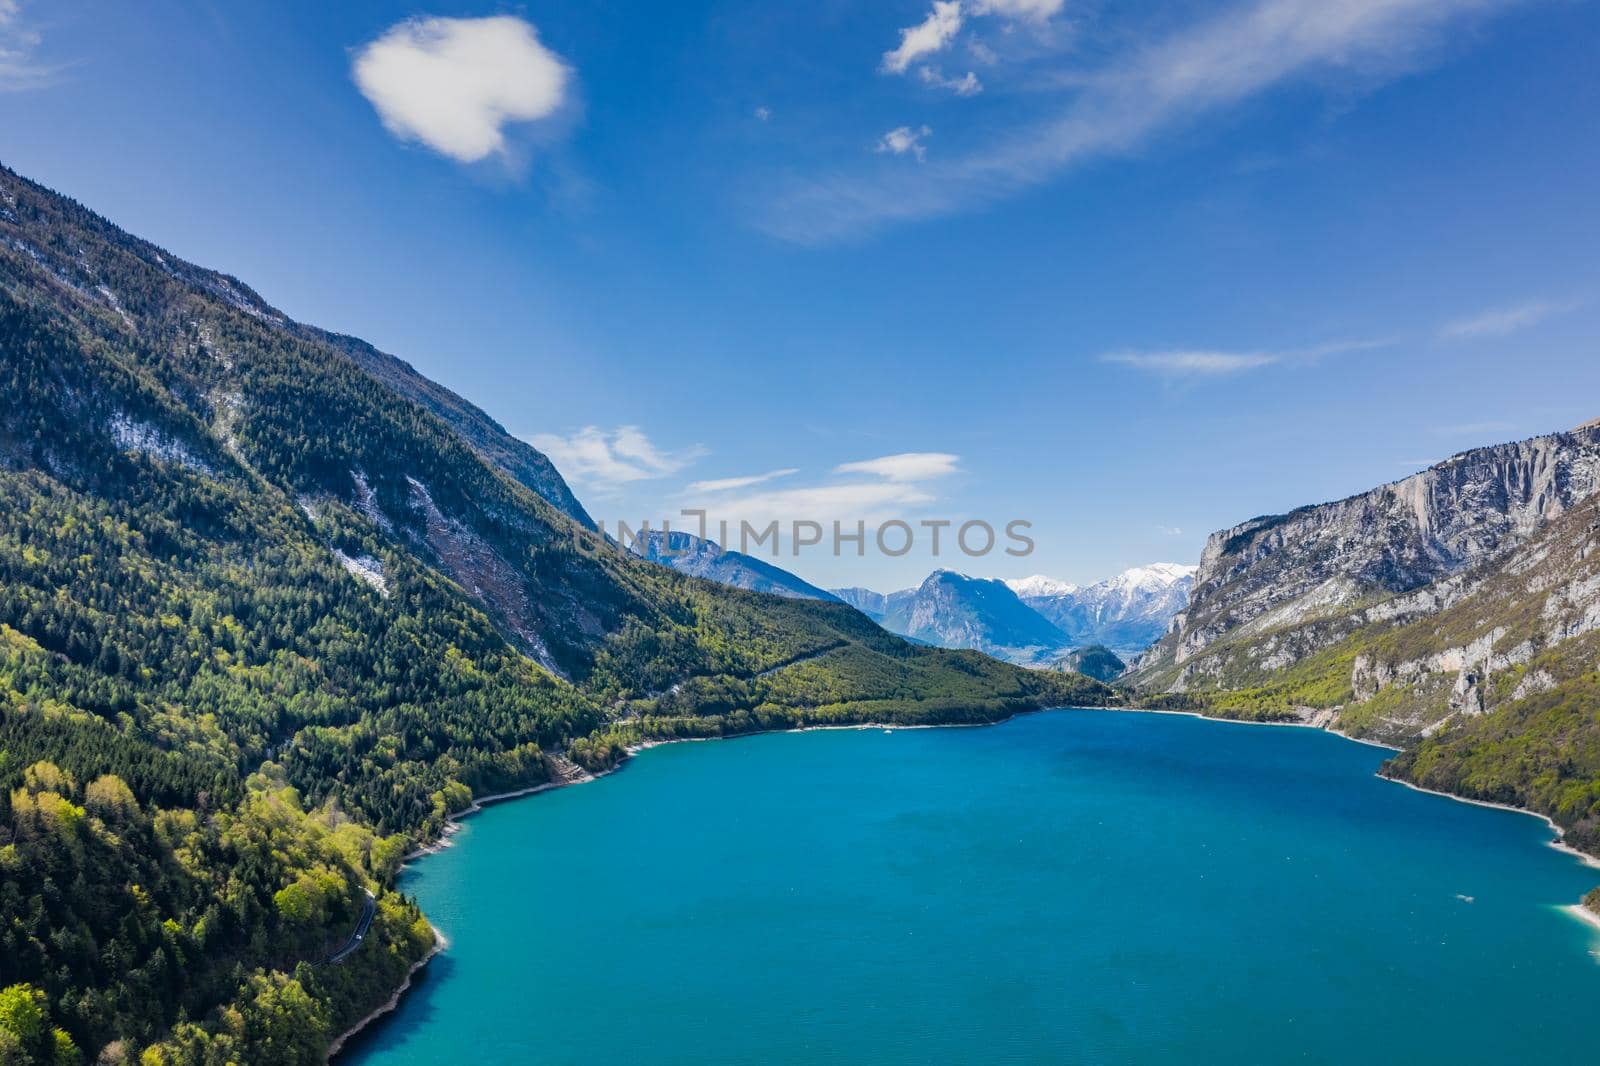 The Improbable aerial landscape of village Molveno, Italy, azure water of lake, empty beach, snow covered mountains Dolomites on background, roof top of chalet, sunny weather, a piers, coastline, by vladimirdrozdin